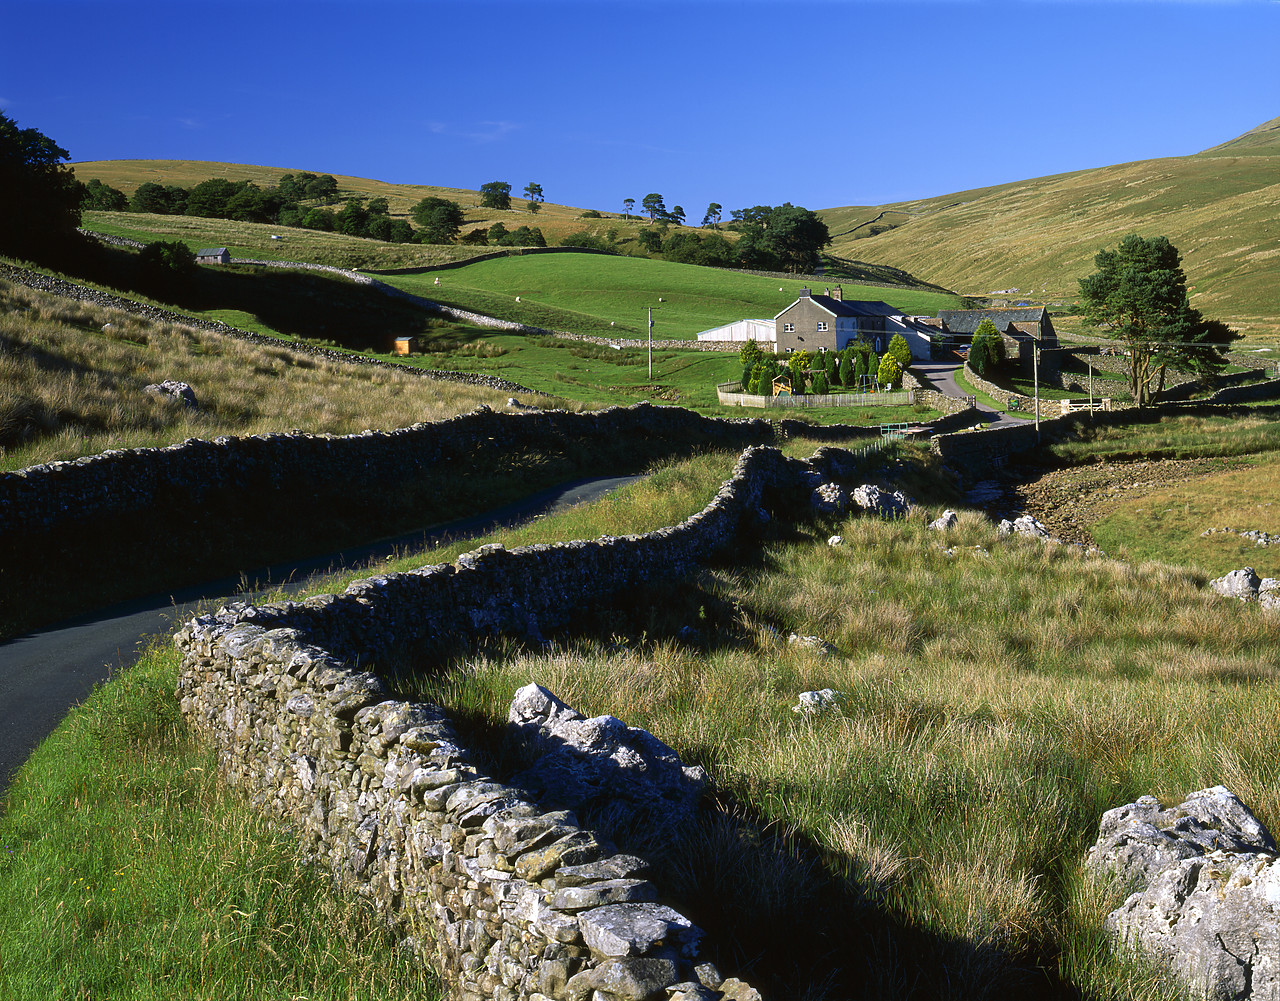 #060774-1 - Road to Kingsdale Head Farm, Yorkshire Dales National Park, North Yorkshire, England